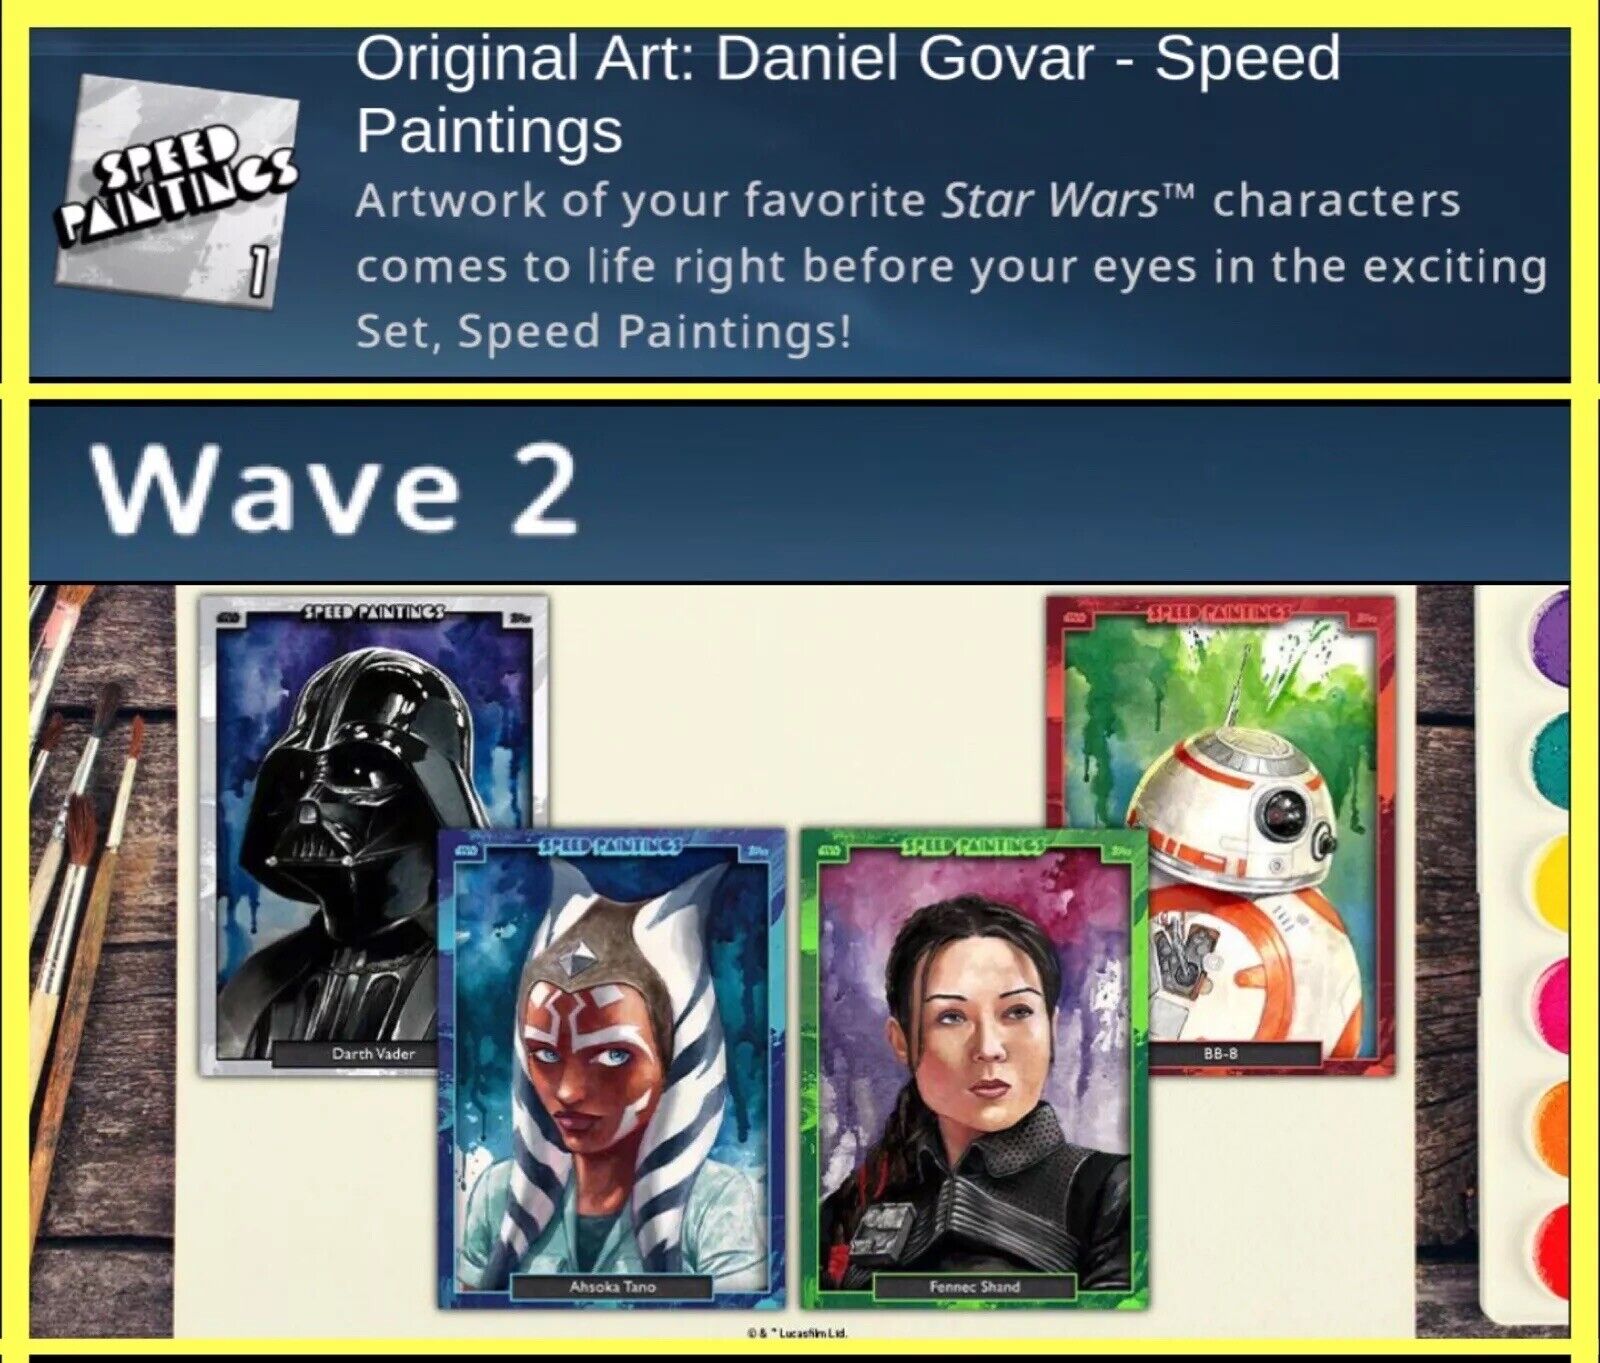 WAVE 2 SPEED PAINTINGS EPIC+SR+R+TRIBUTE 40 CARD SET-TOPPS STAR WARS CARD TRADER